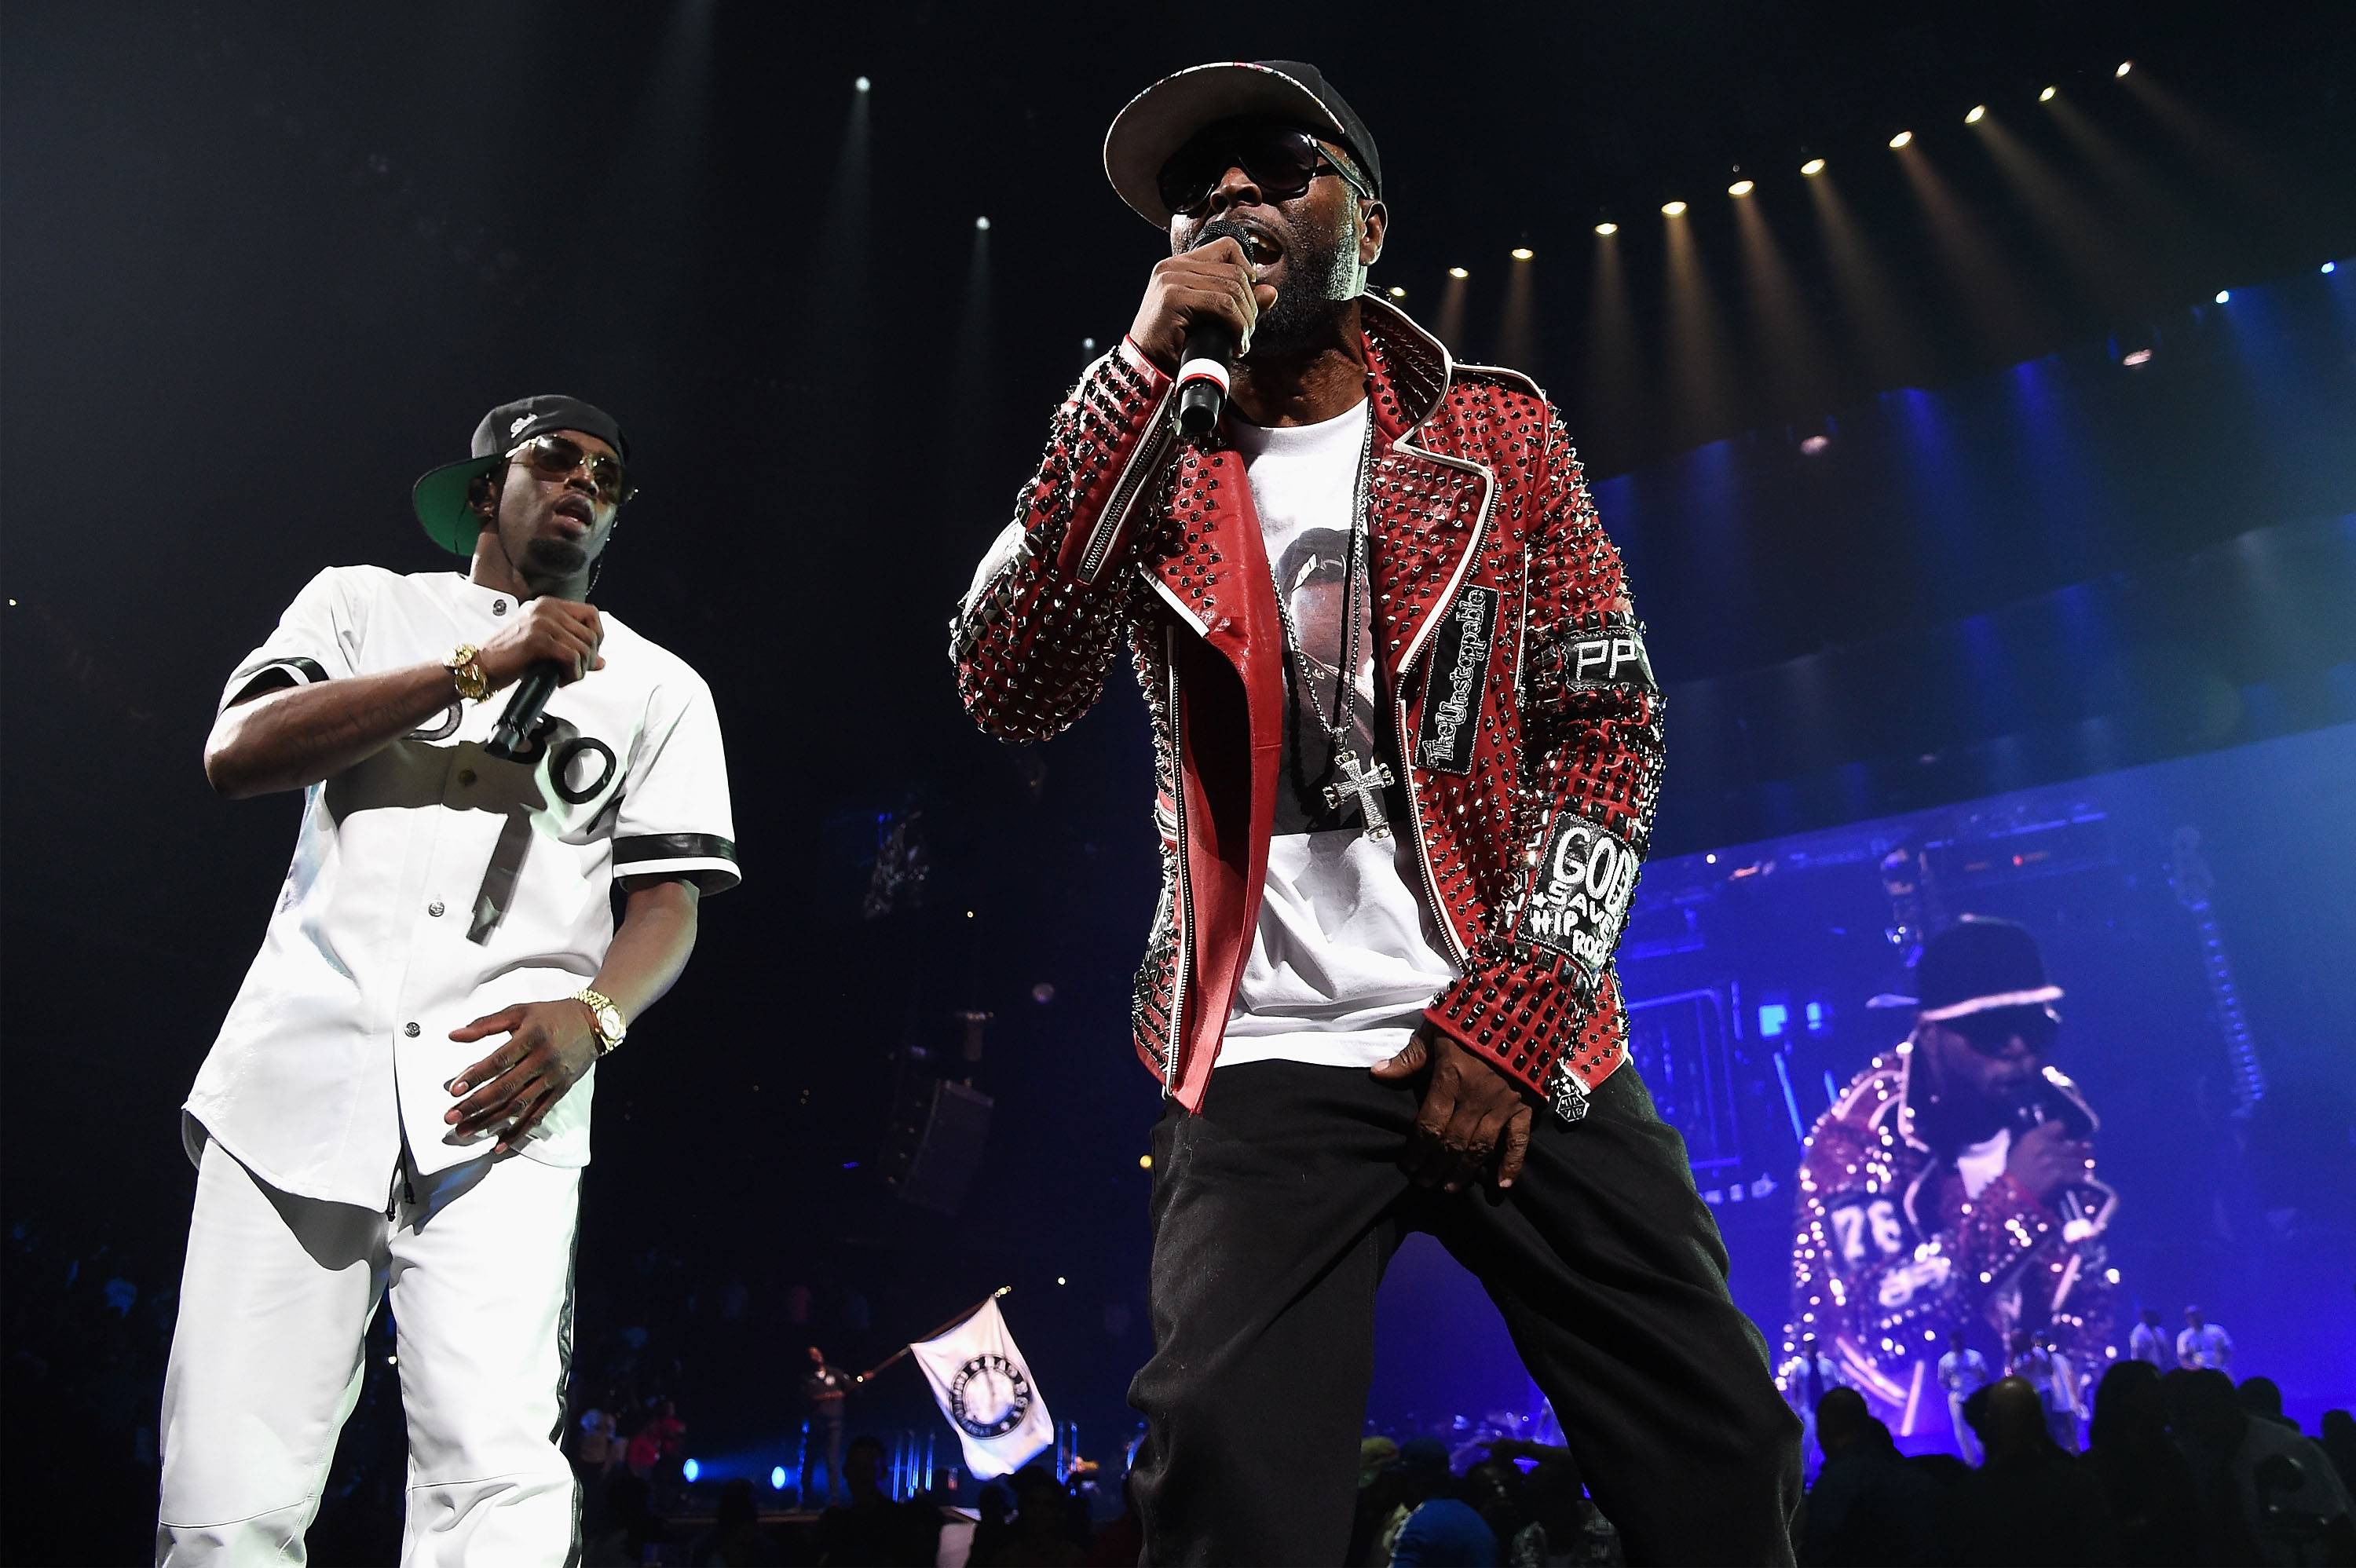 "NEW YORK, NY - MAY 20:  Sean "Diddy" Combs aka Puff Daddy (L) and Black Rob perform onstage during the Puff Daddy and The Family Bad Boy Reunion Tour presented by Ciroc Vodka And Live Nation at Barclays Center on May 20, 2016 in New York City.  (Photo by Jamie McCarthy/Getty Images for Live Nation)"